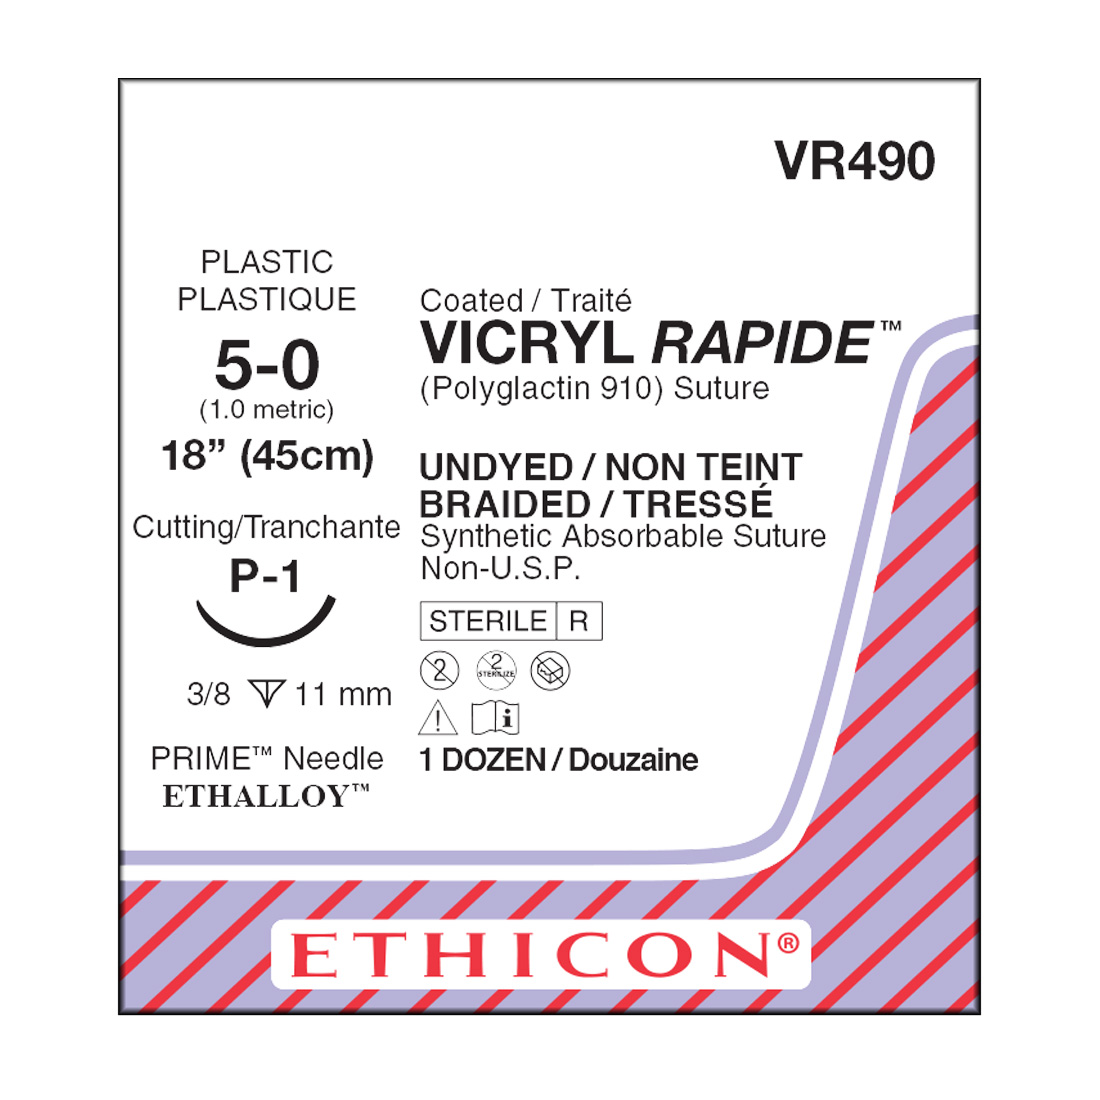 VICRYL RAPIDE™ Undyed Braided & Coated Sutures, 5-0, P-1, Precision Point-Reverse Cutting, 18" - 12/Box